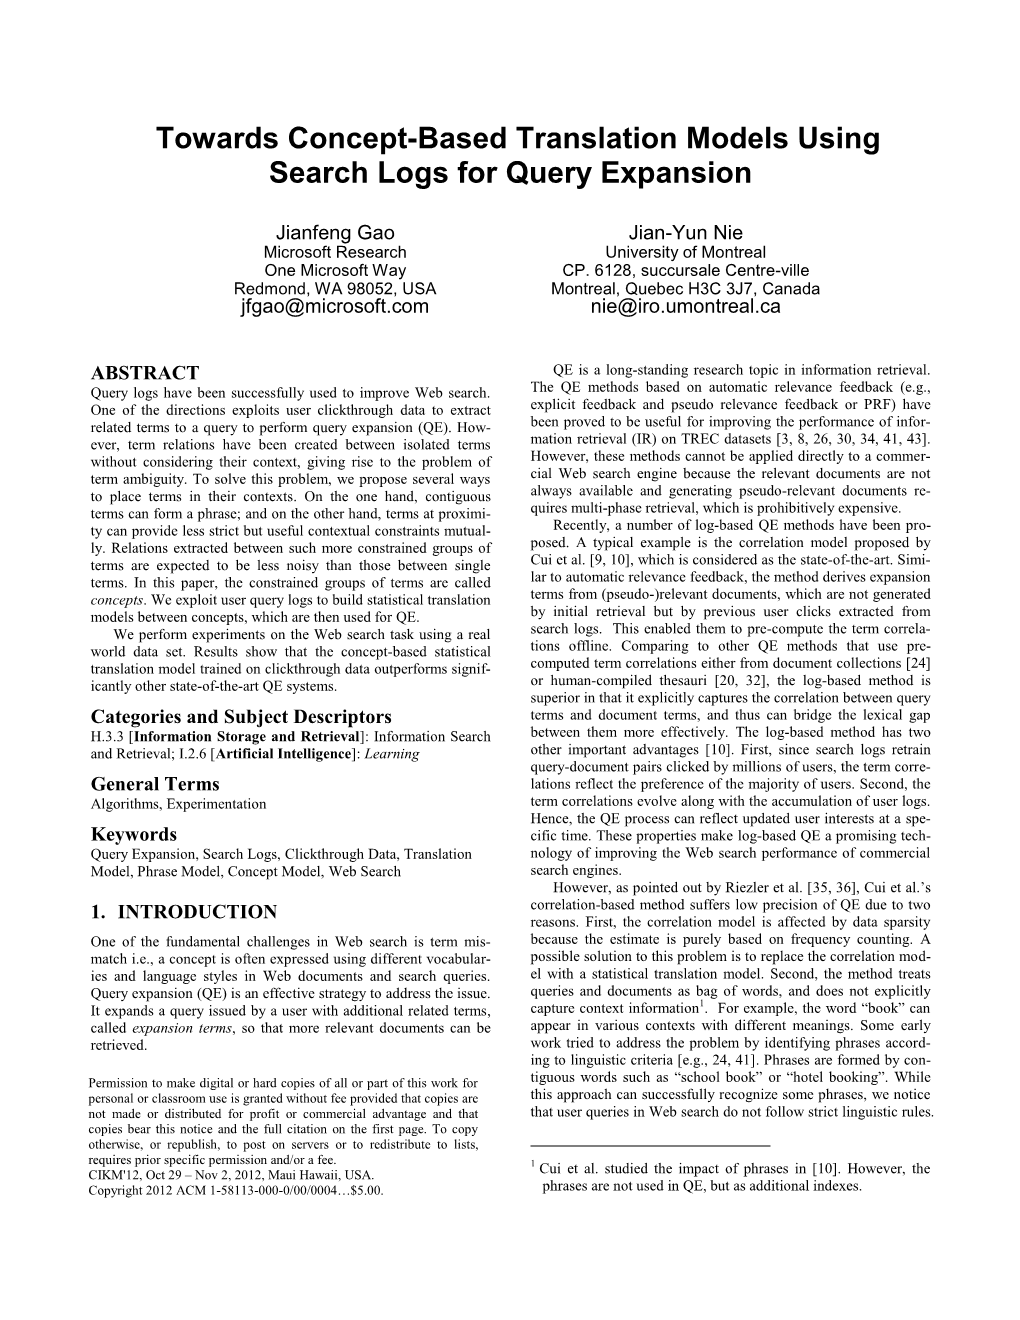 Towards Concept-Based Translation Models Using Search Logs for Query Expansion